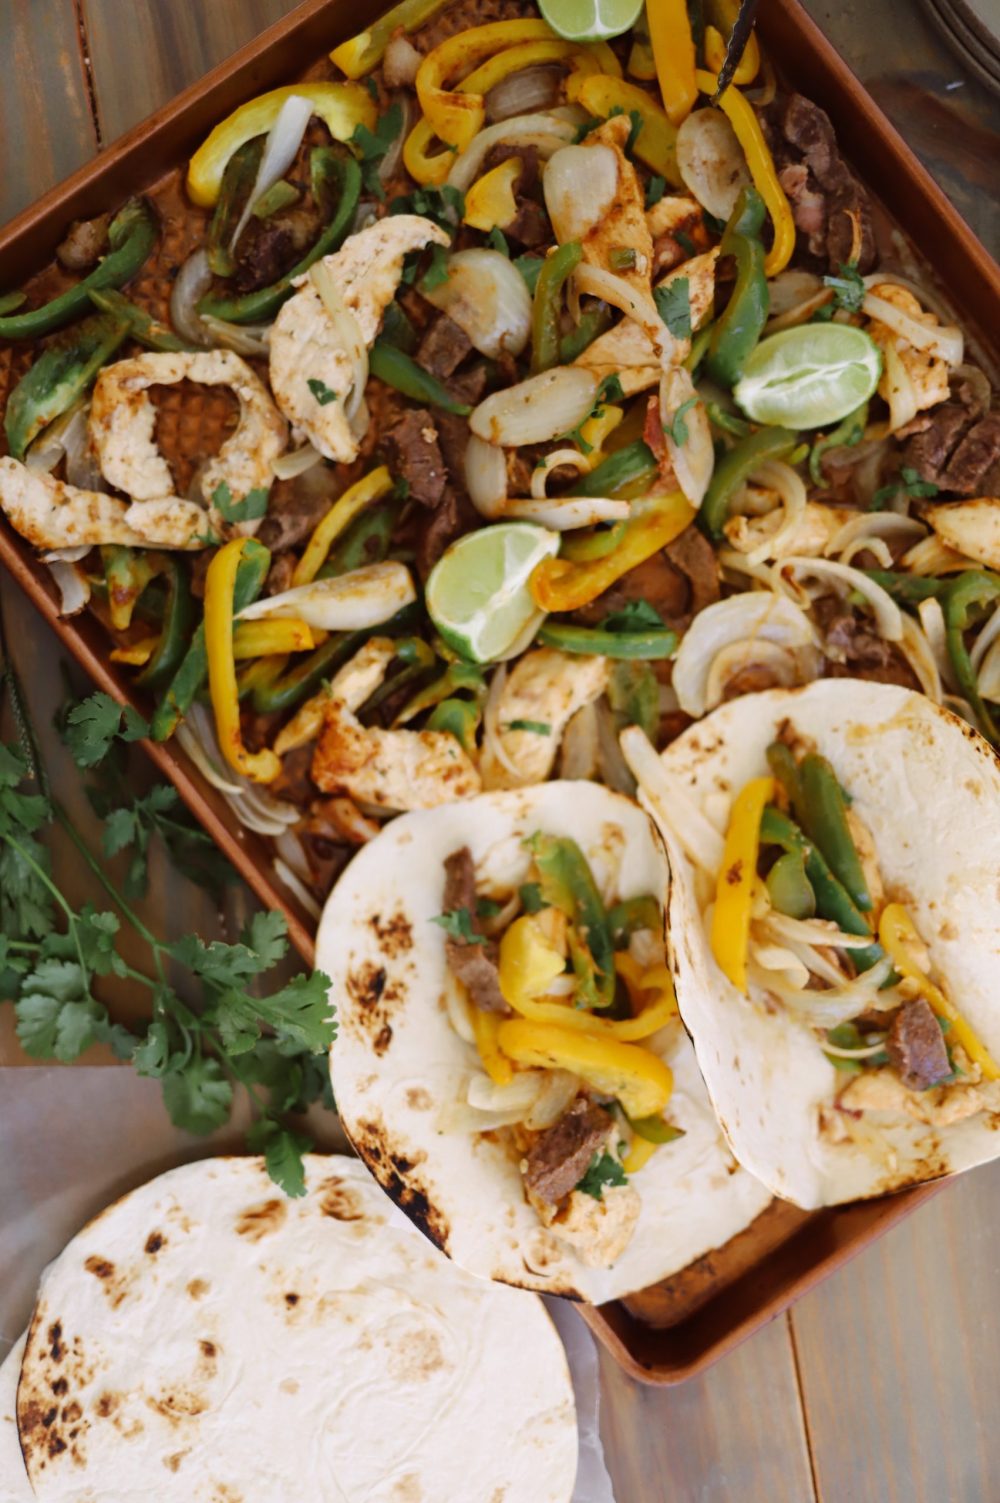 Dinner made easy and ALL IN ONE PAN with these steak and chicken sheet pan fajitas. Set it out on the table and serve with toppings to feed a big family easily!